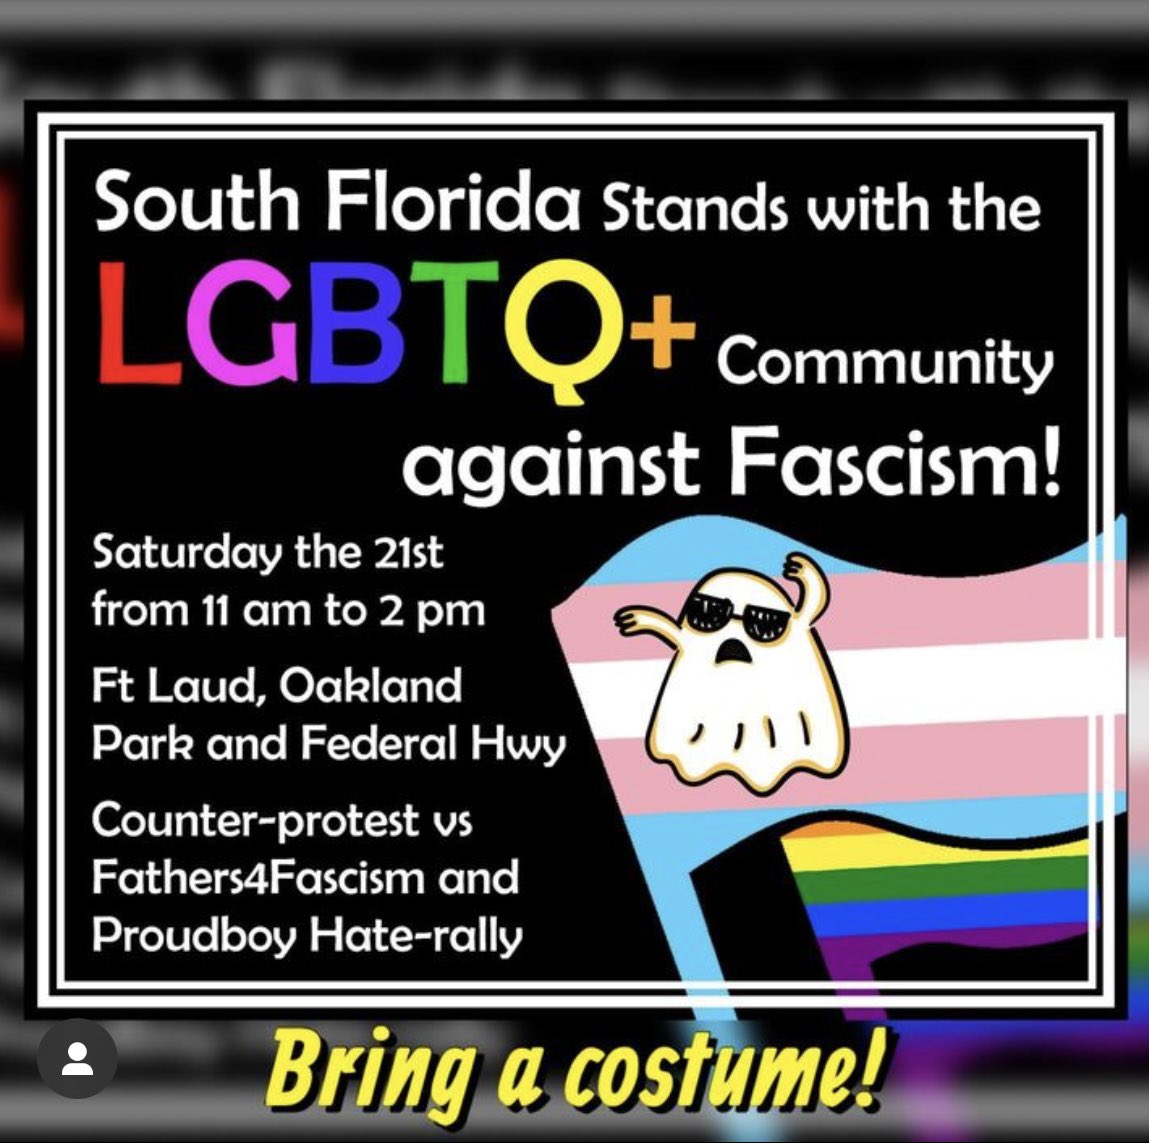 Halloween queer costume party, with an anti fascist twist! 

Saturday morning at Oakland Park Blvd and N Federal in Ft. Lauderdale.

#ThisPrideThatIHave #BashBackFL #TheseQueersBashBack #FuckOffFascists #WeAreEverywhere #Transtifa #WeKeepUsSafe #CommunityDefense